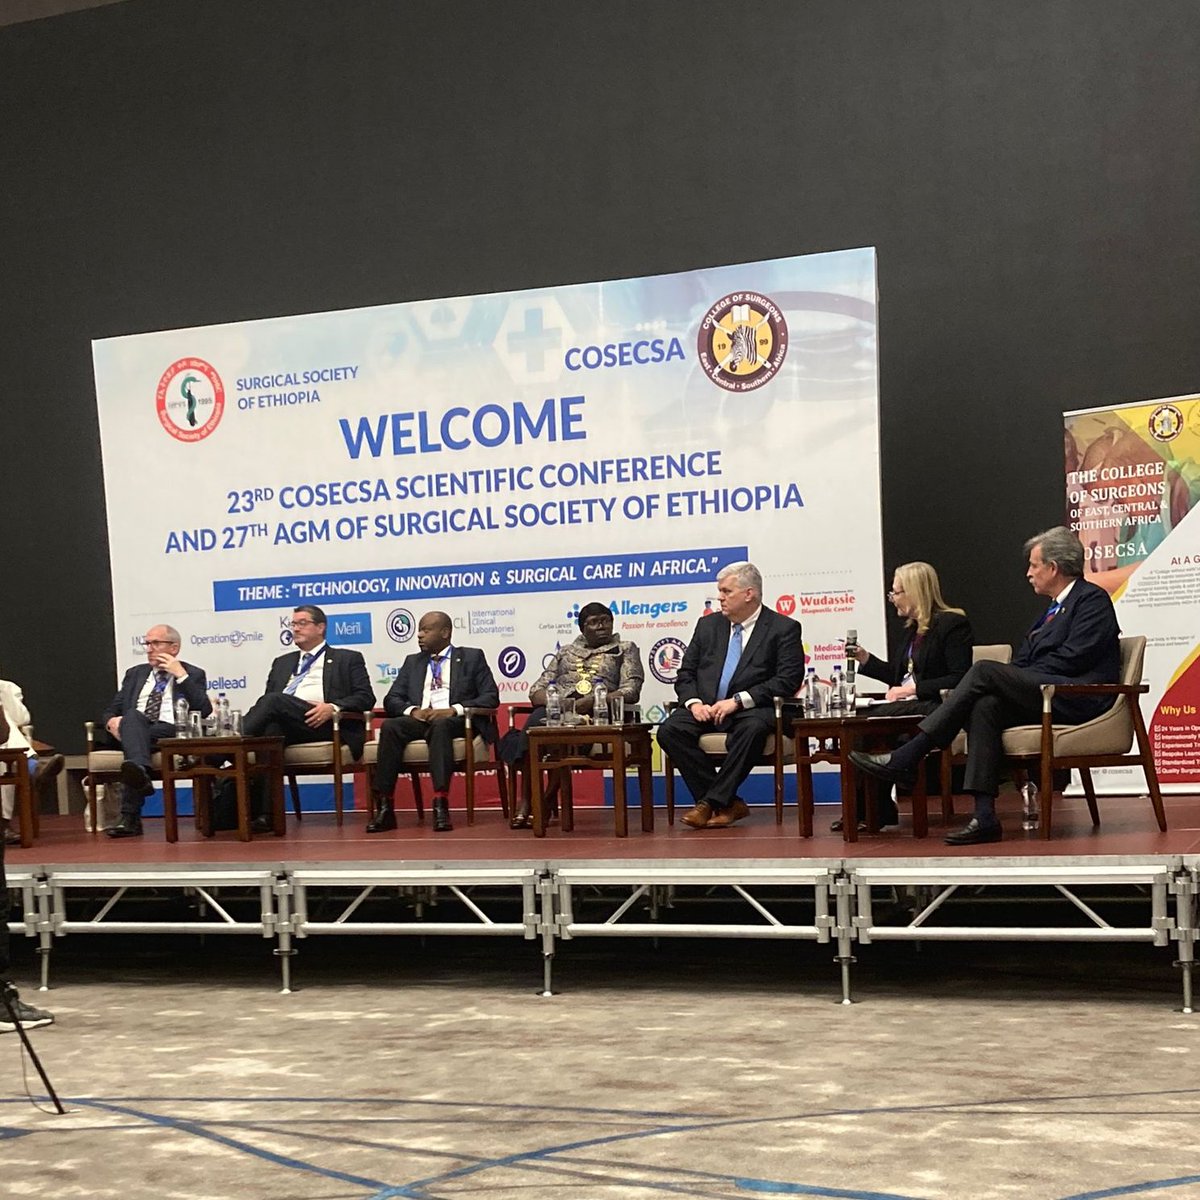 The panel discussion between Presidents and representatives of Surgical Colleges from the UK, Ireland and African Colleges is ongoing at the 23rd @cosecsa Scientific Conference! #globalsurgery #ScientificConference @RCSI_Irl